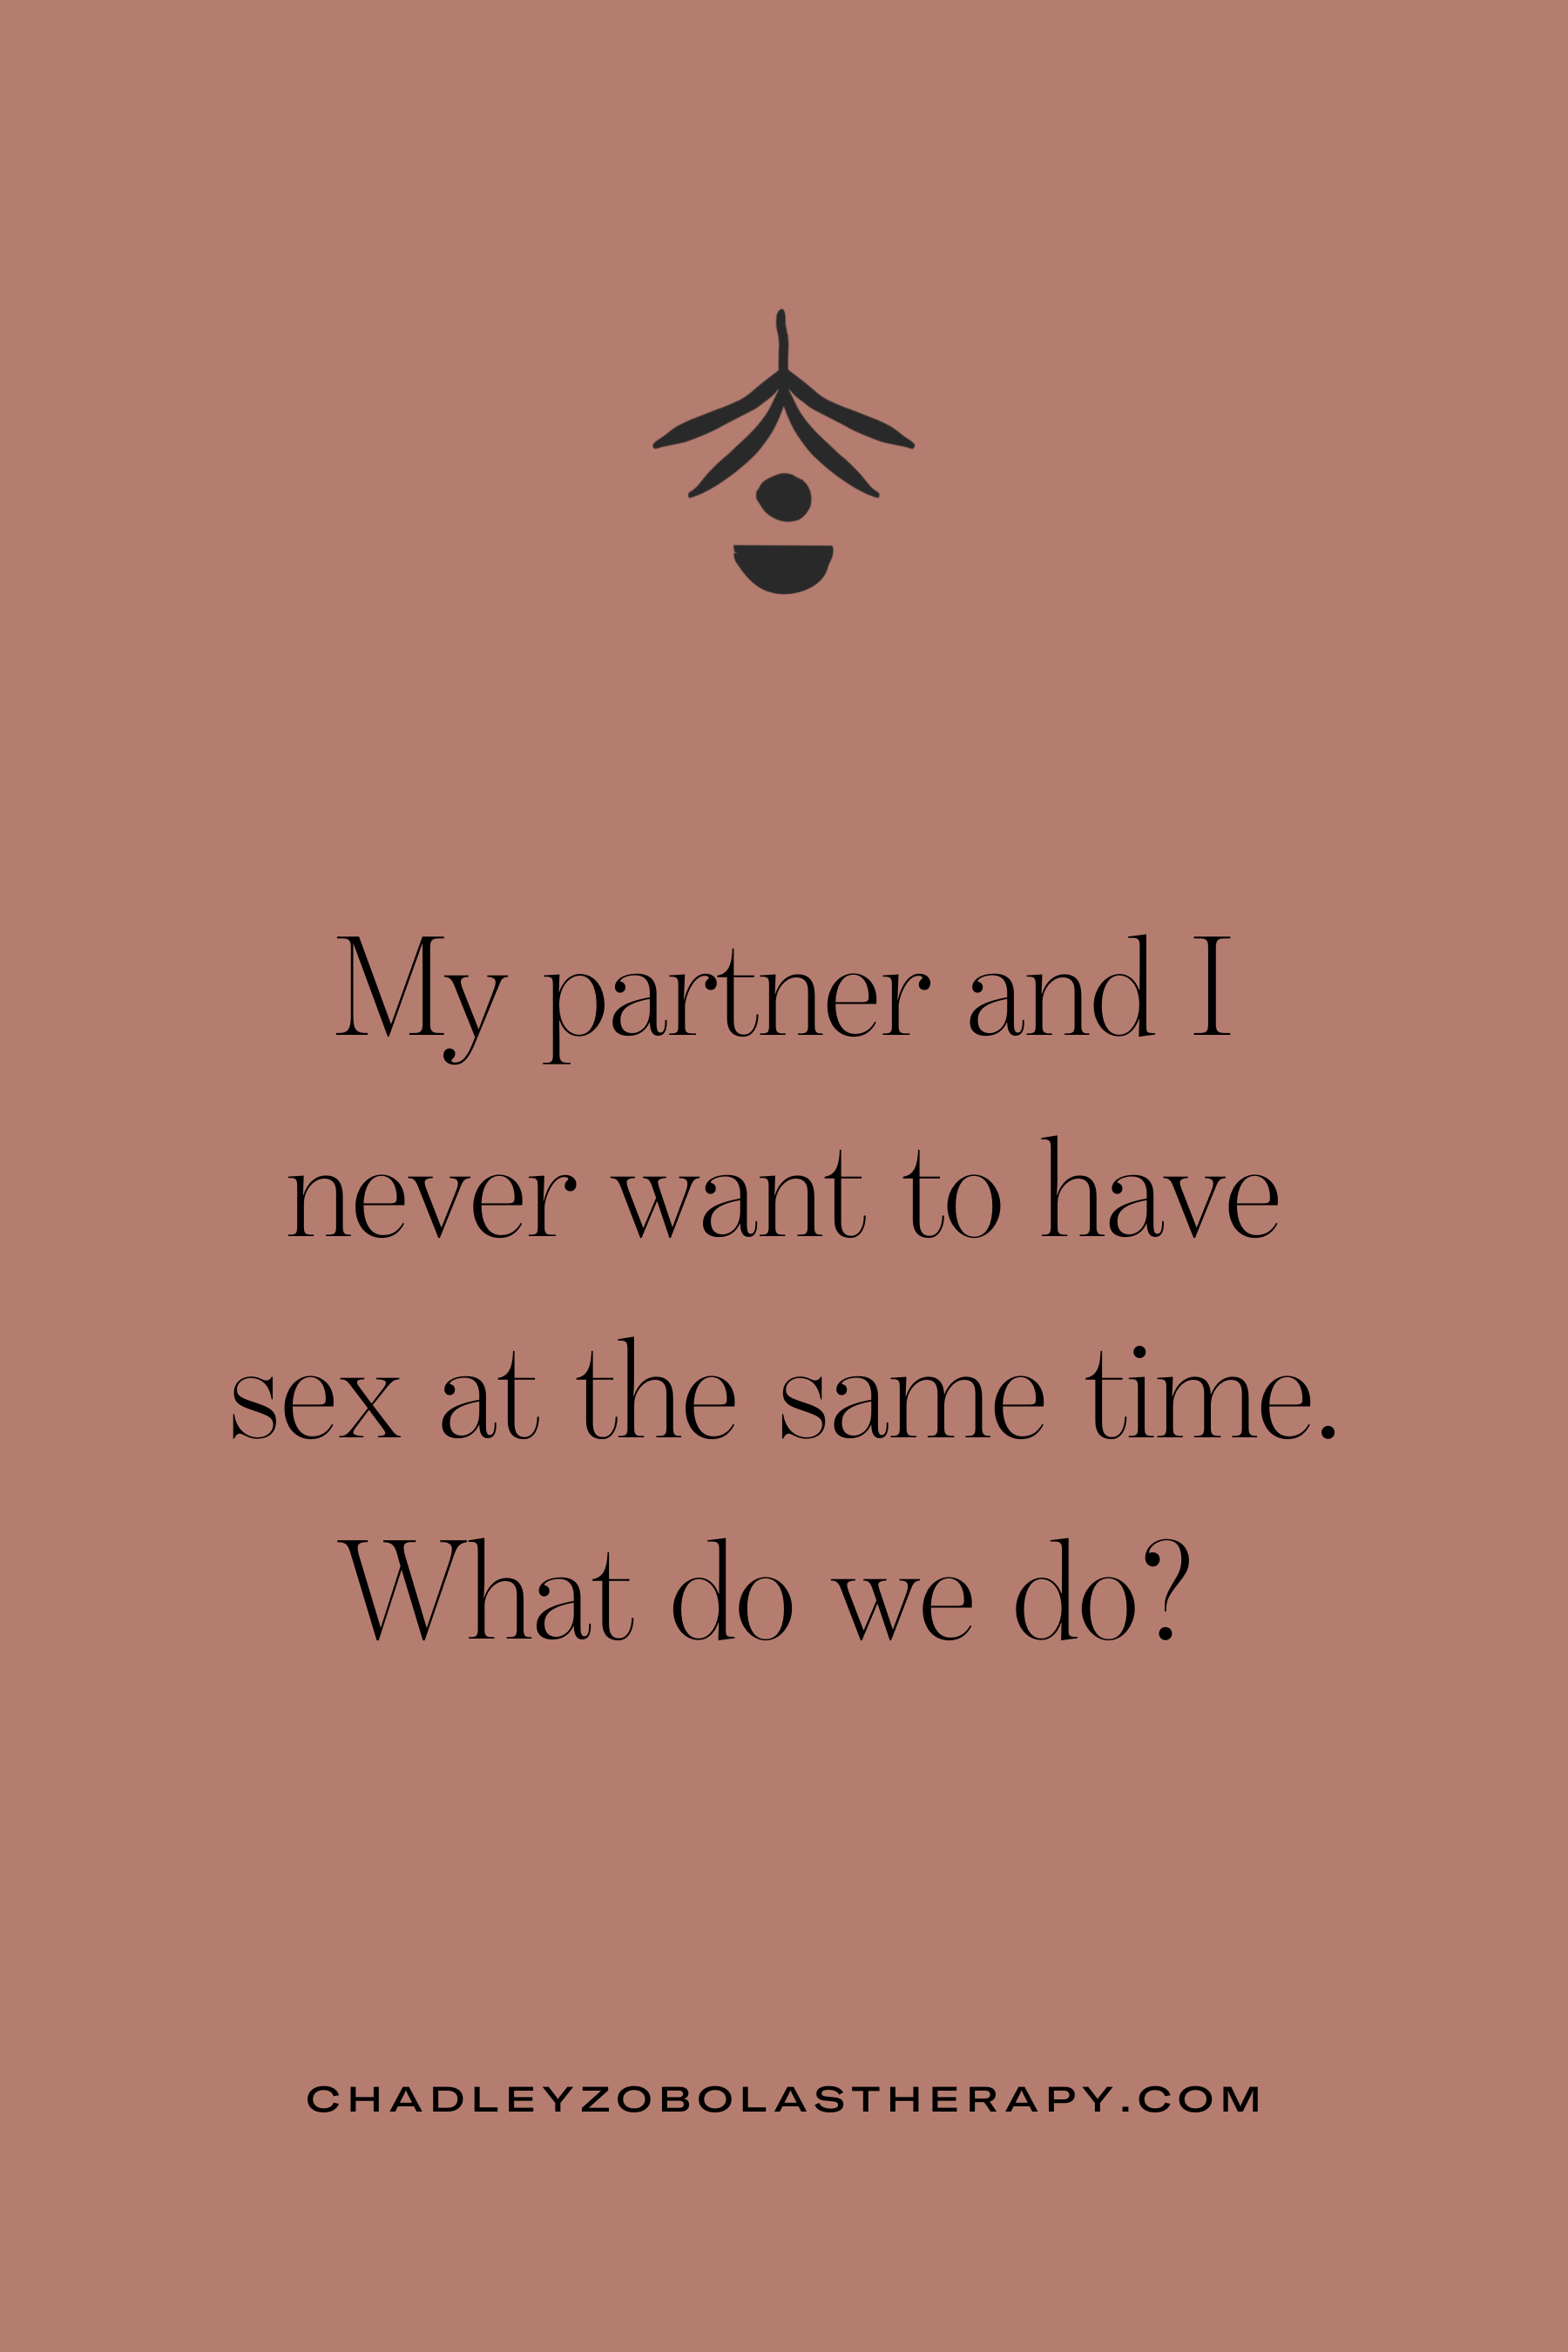 My partner and I never want to have sex at the same time pic picture